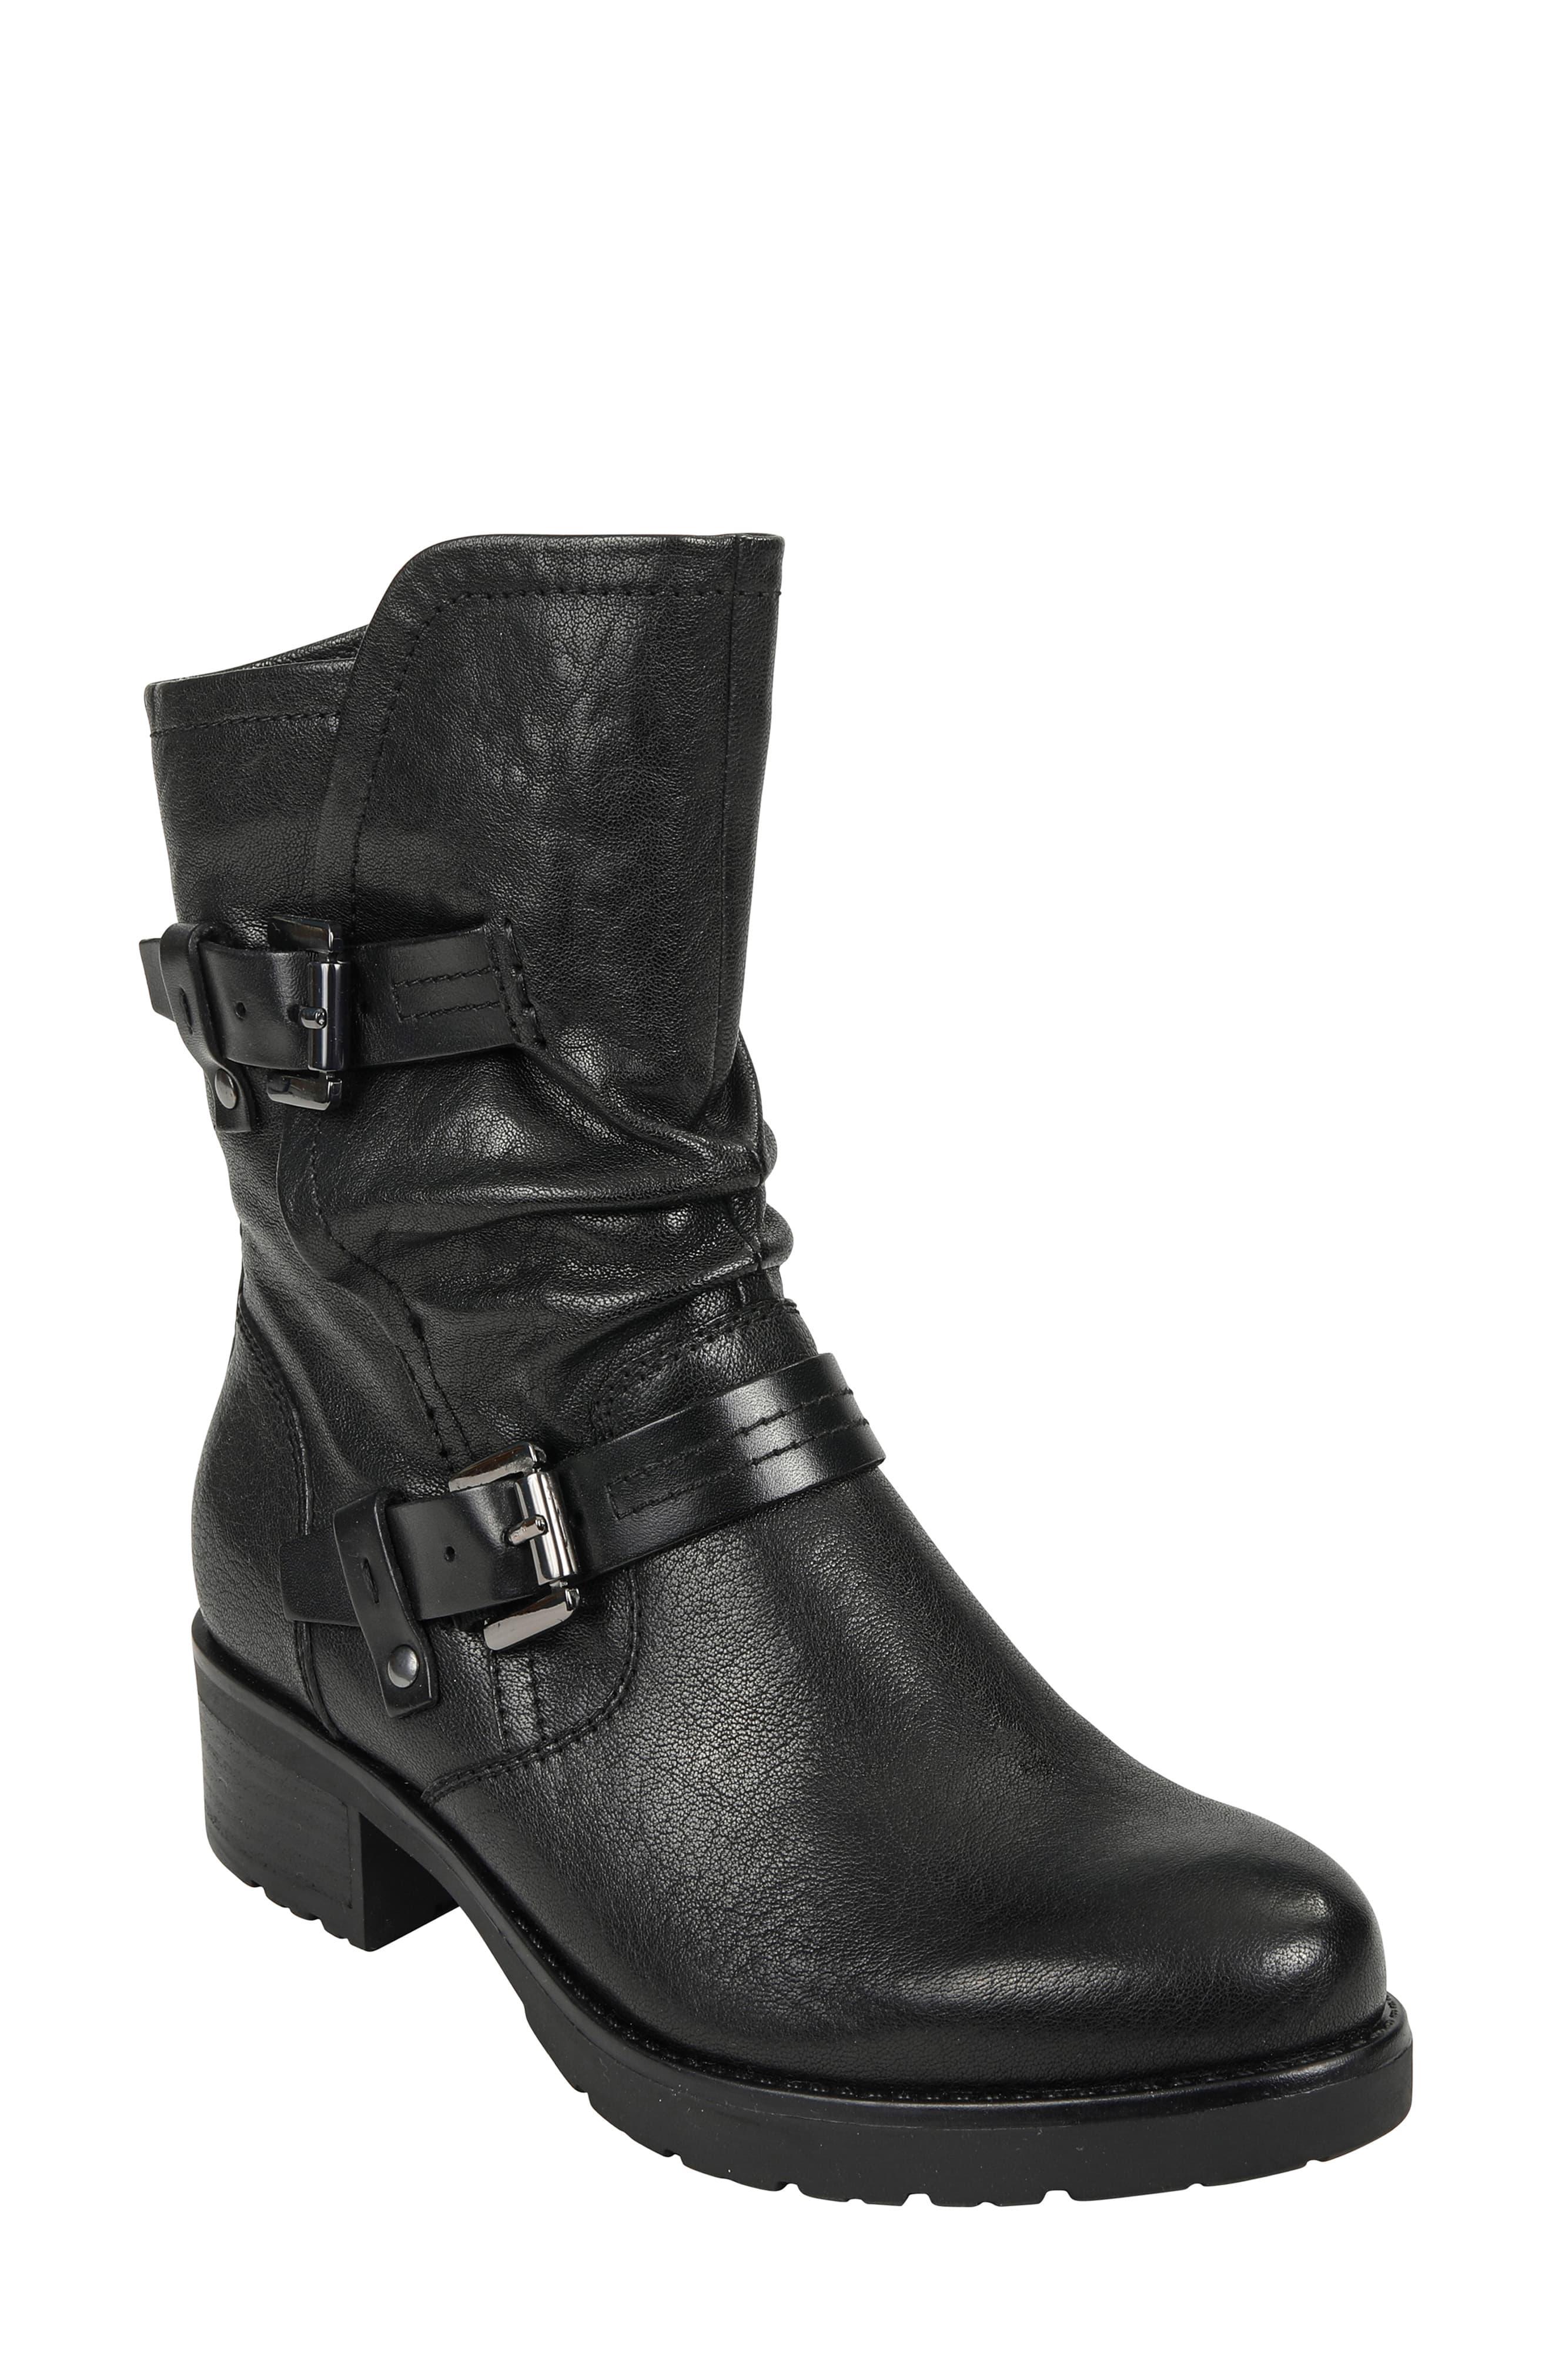 Earth Leather Earth Talus Boot in Black - Lyst